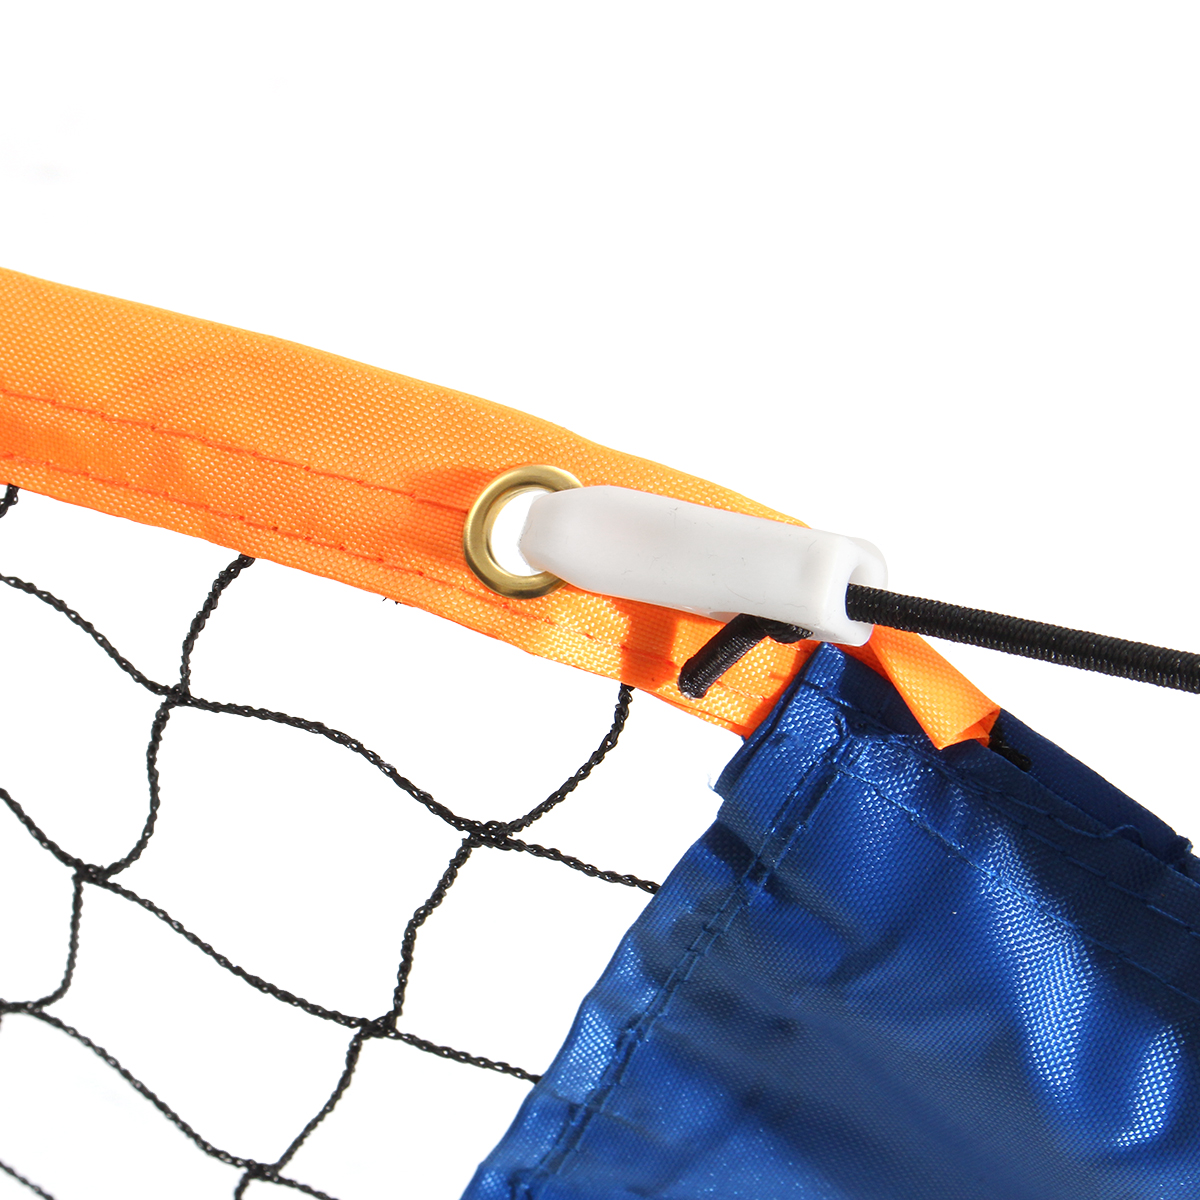 3x085M-Tennis-Net-Standard-Steel-Cable-Badminton-Volleyball-Training-Net-Team-Sport-Net-Frame-with-S-1723822-9